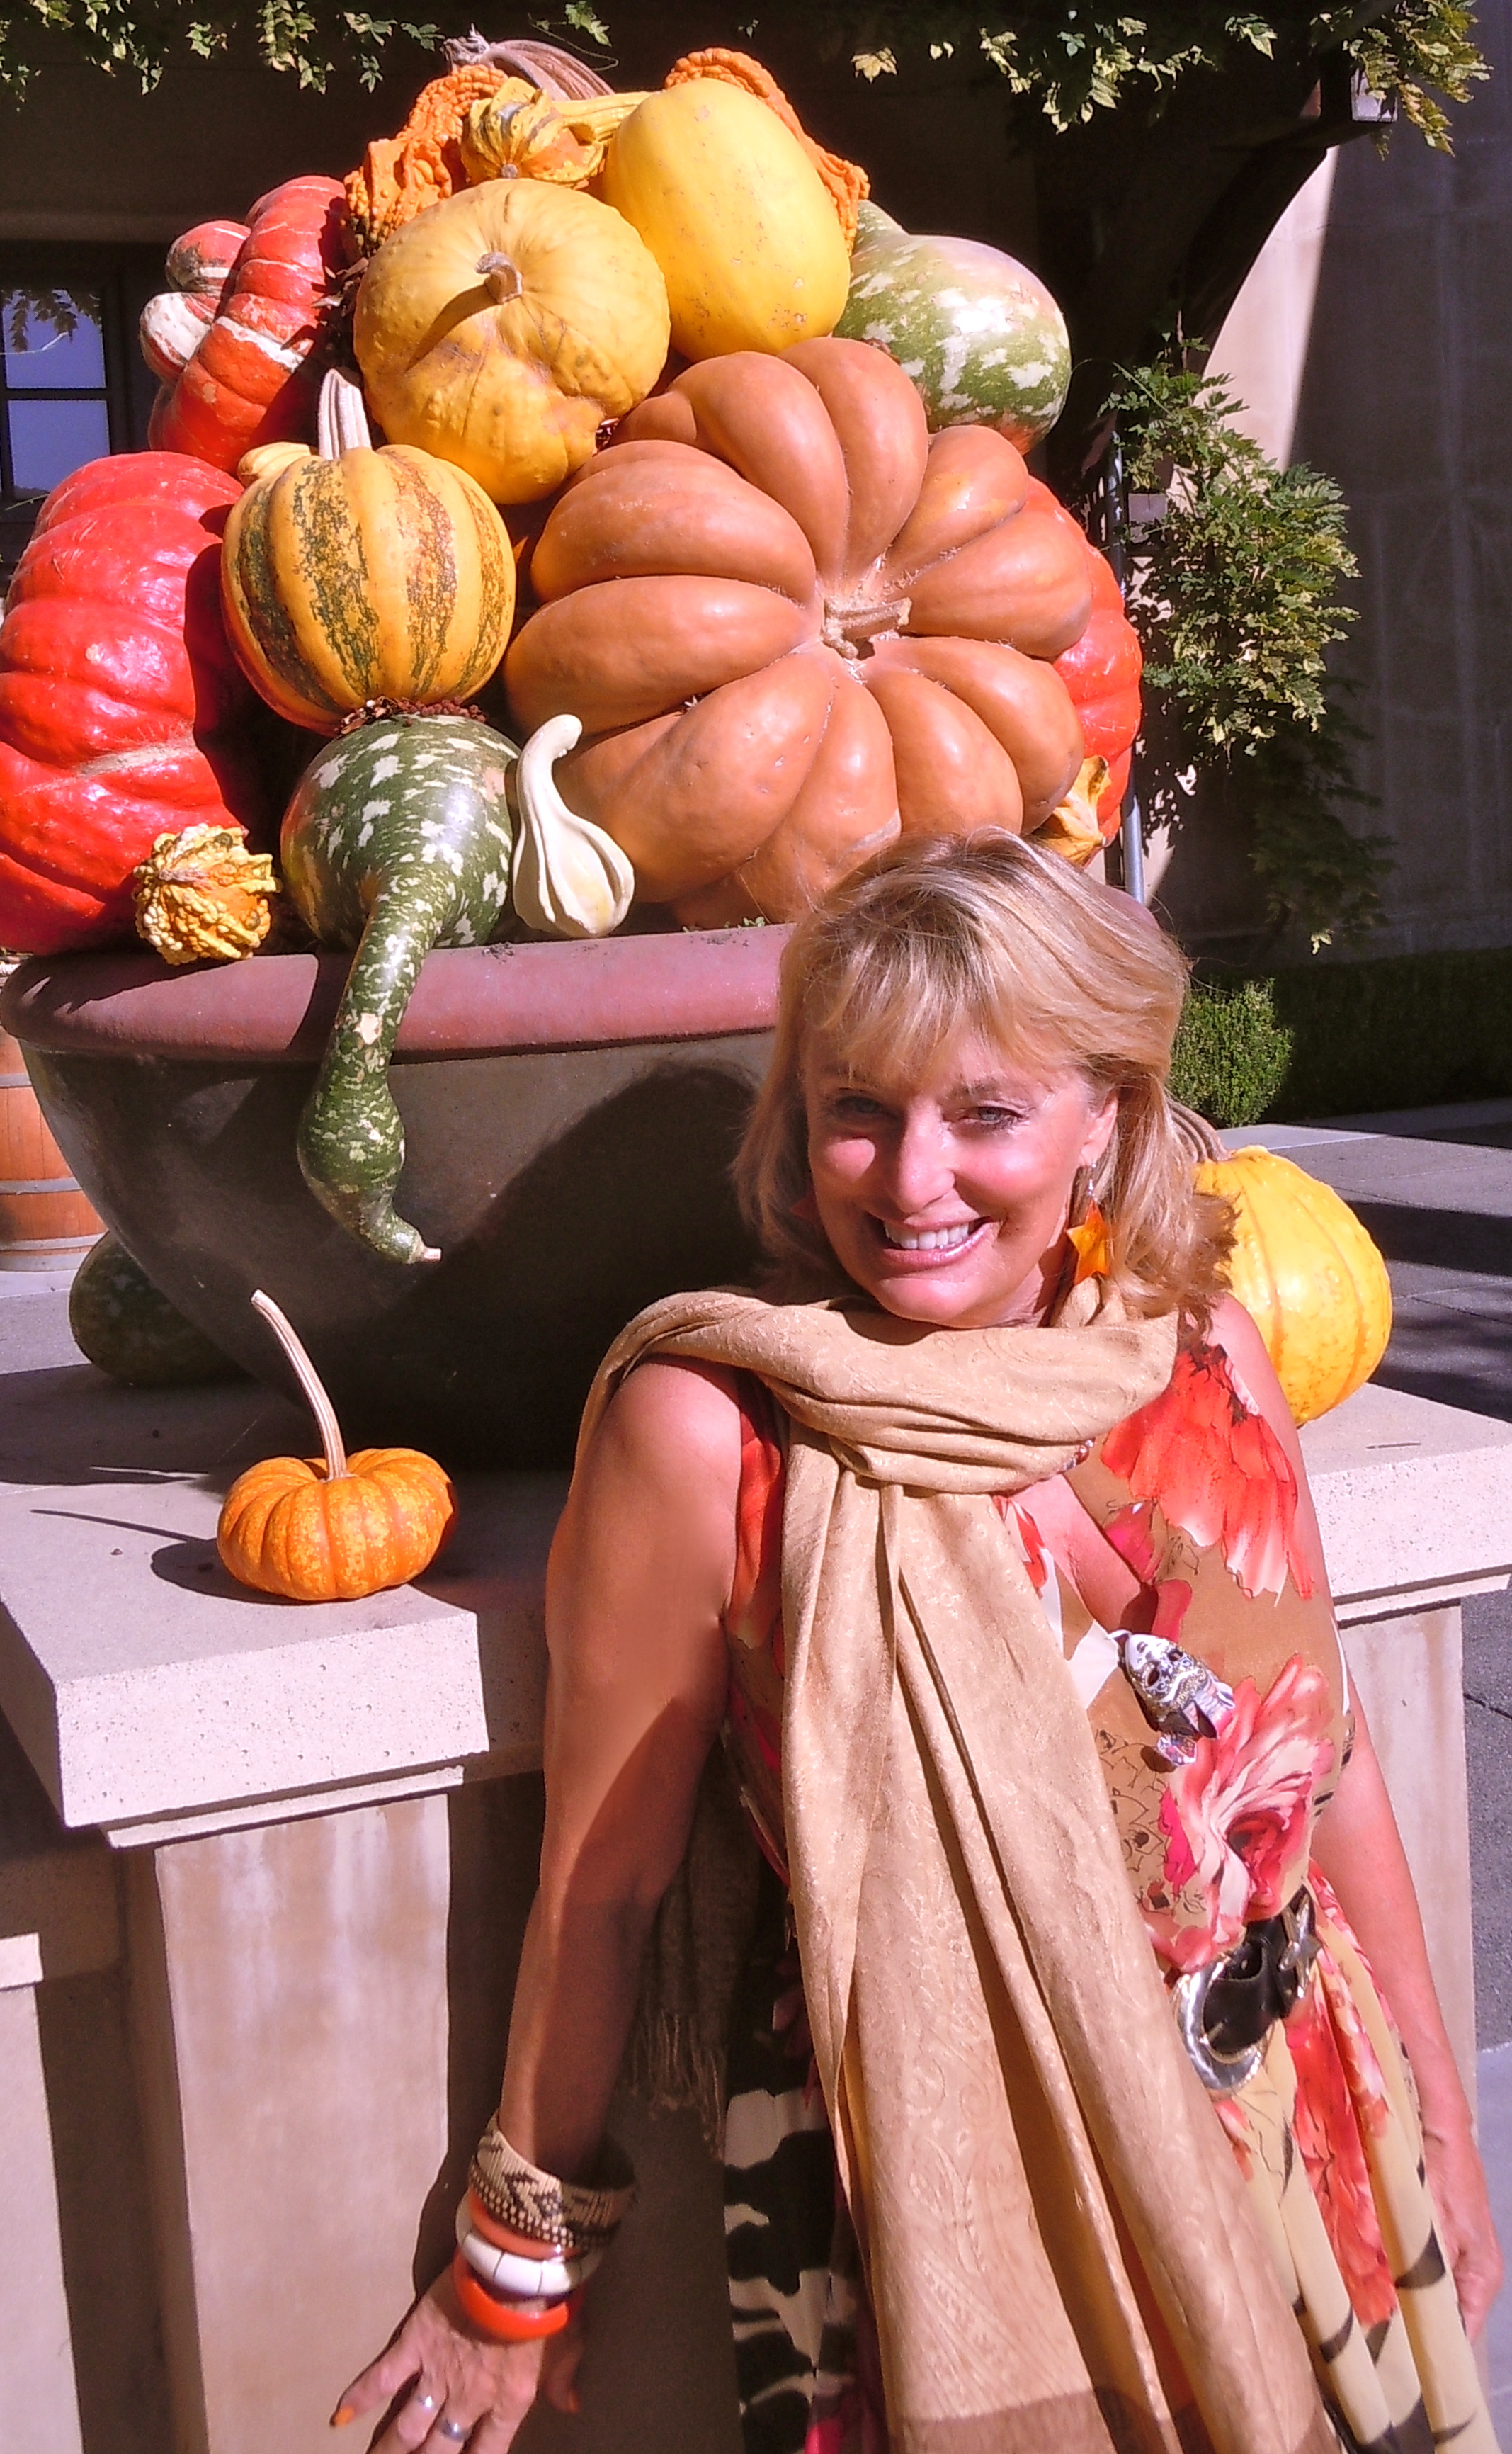 ﻿Ask Cynthia Brian about Pumpkins, Readers Request